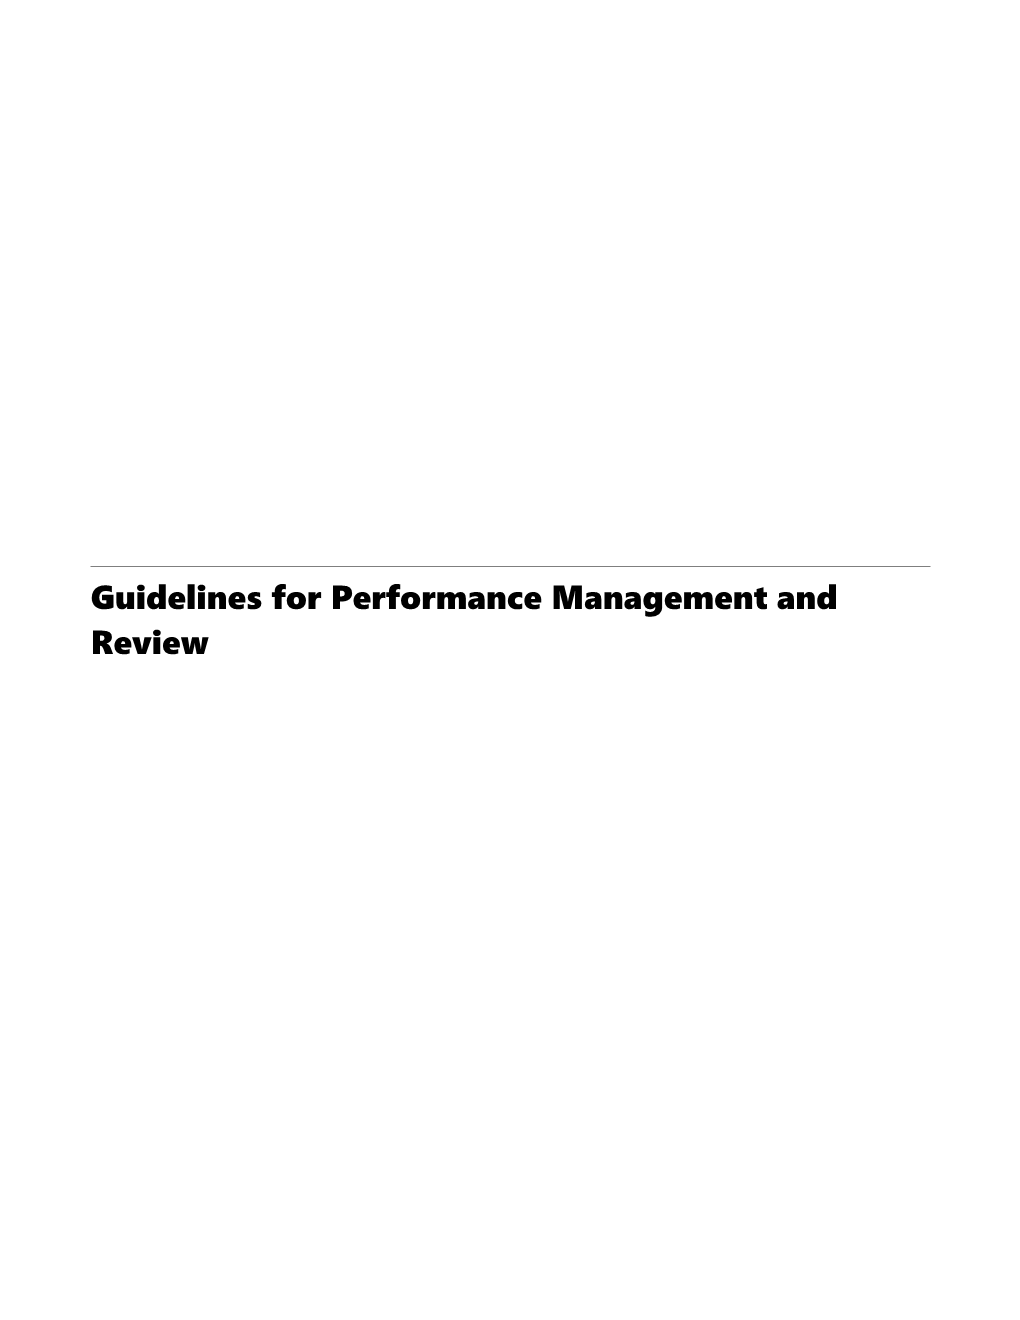 Guidelines for Performance Management and Review